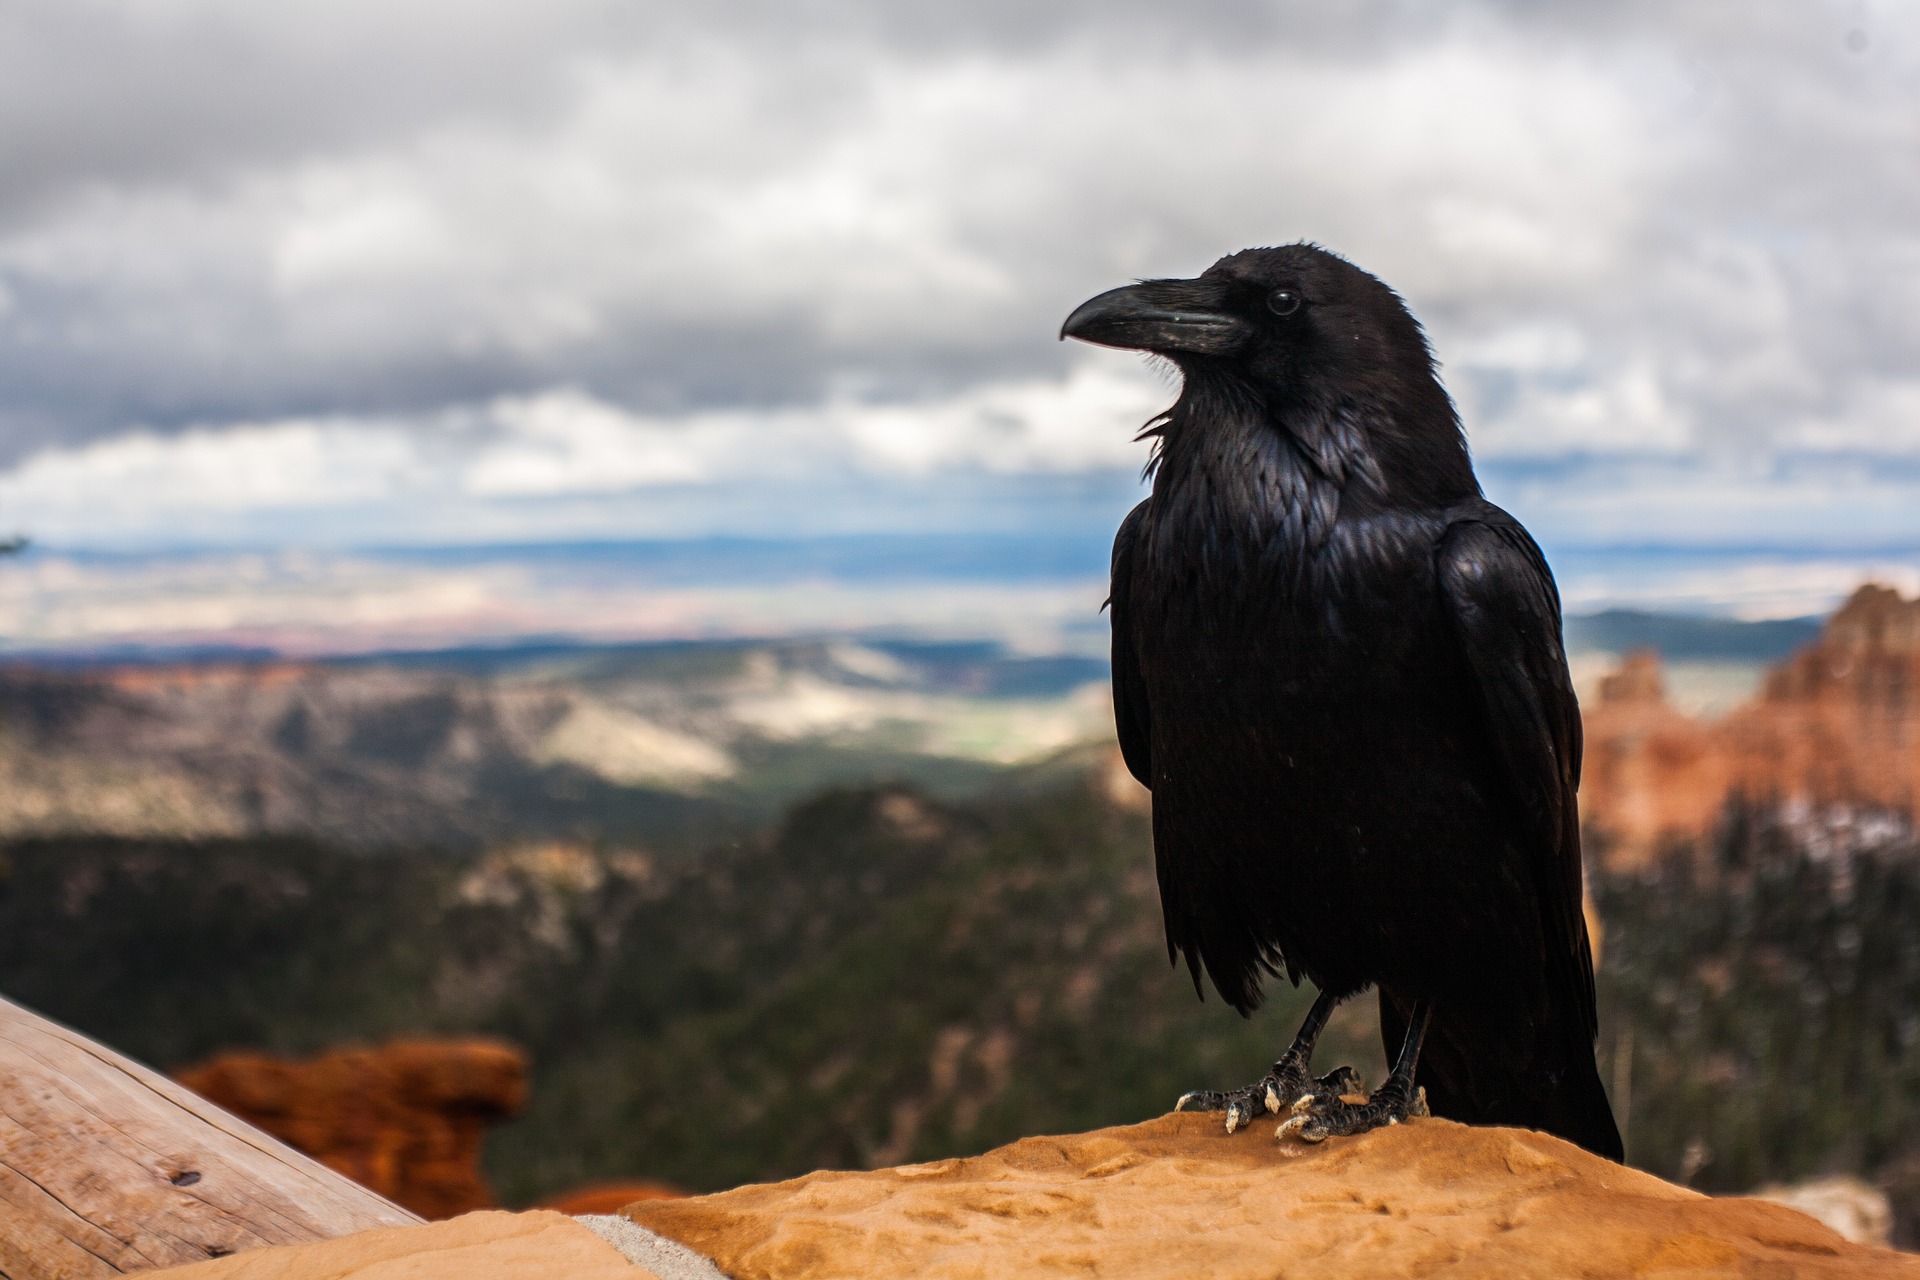 Crow / Raven in front of canyon in nature